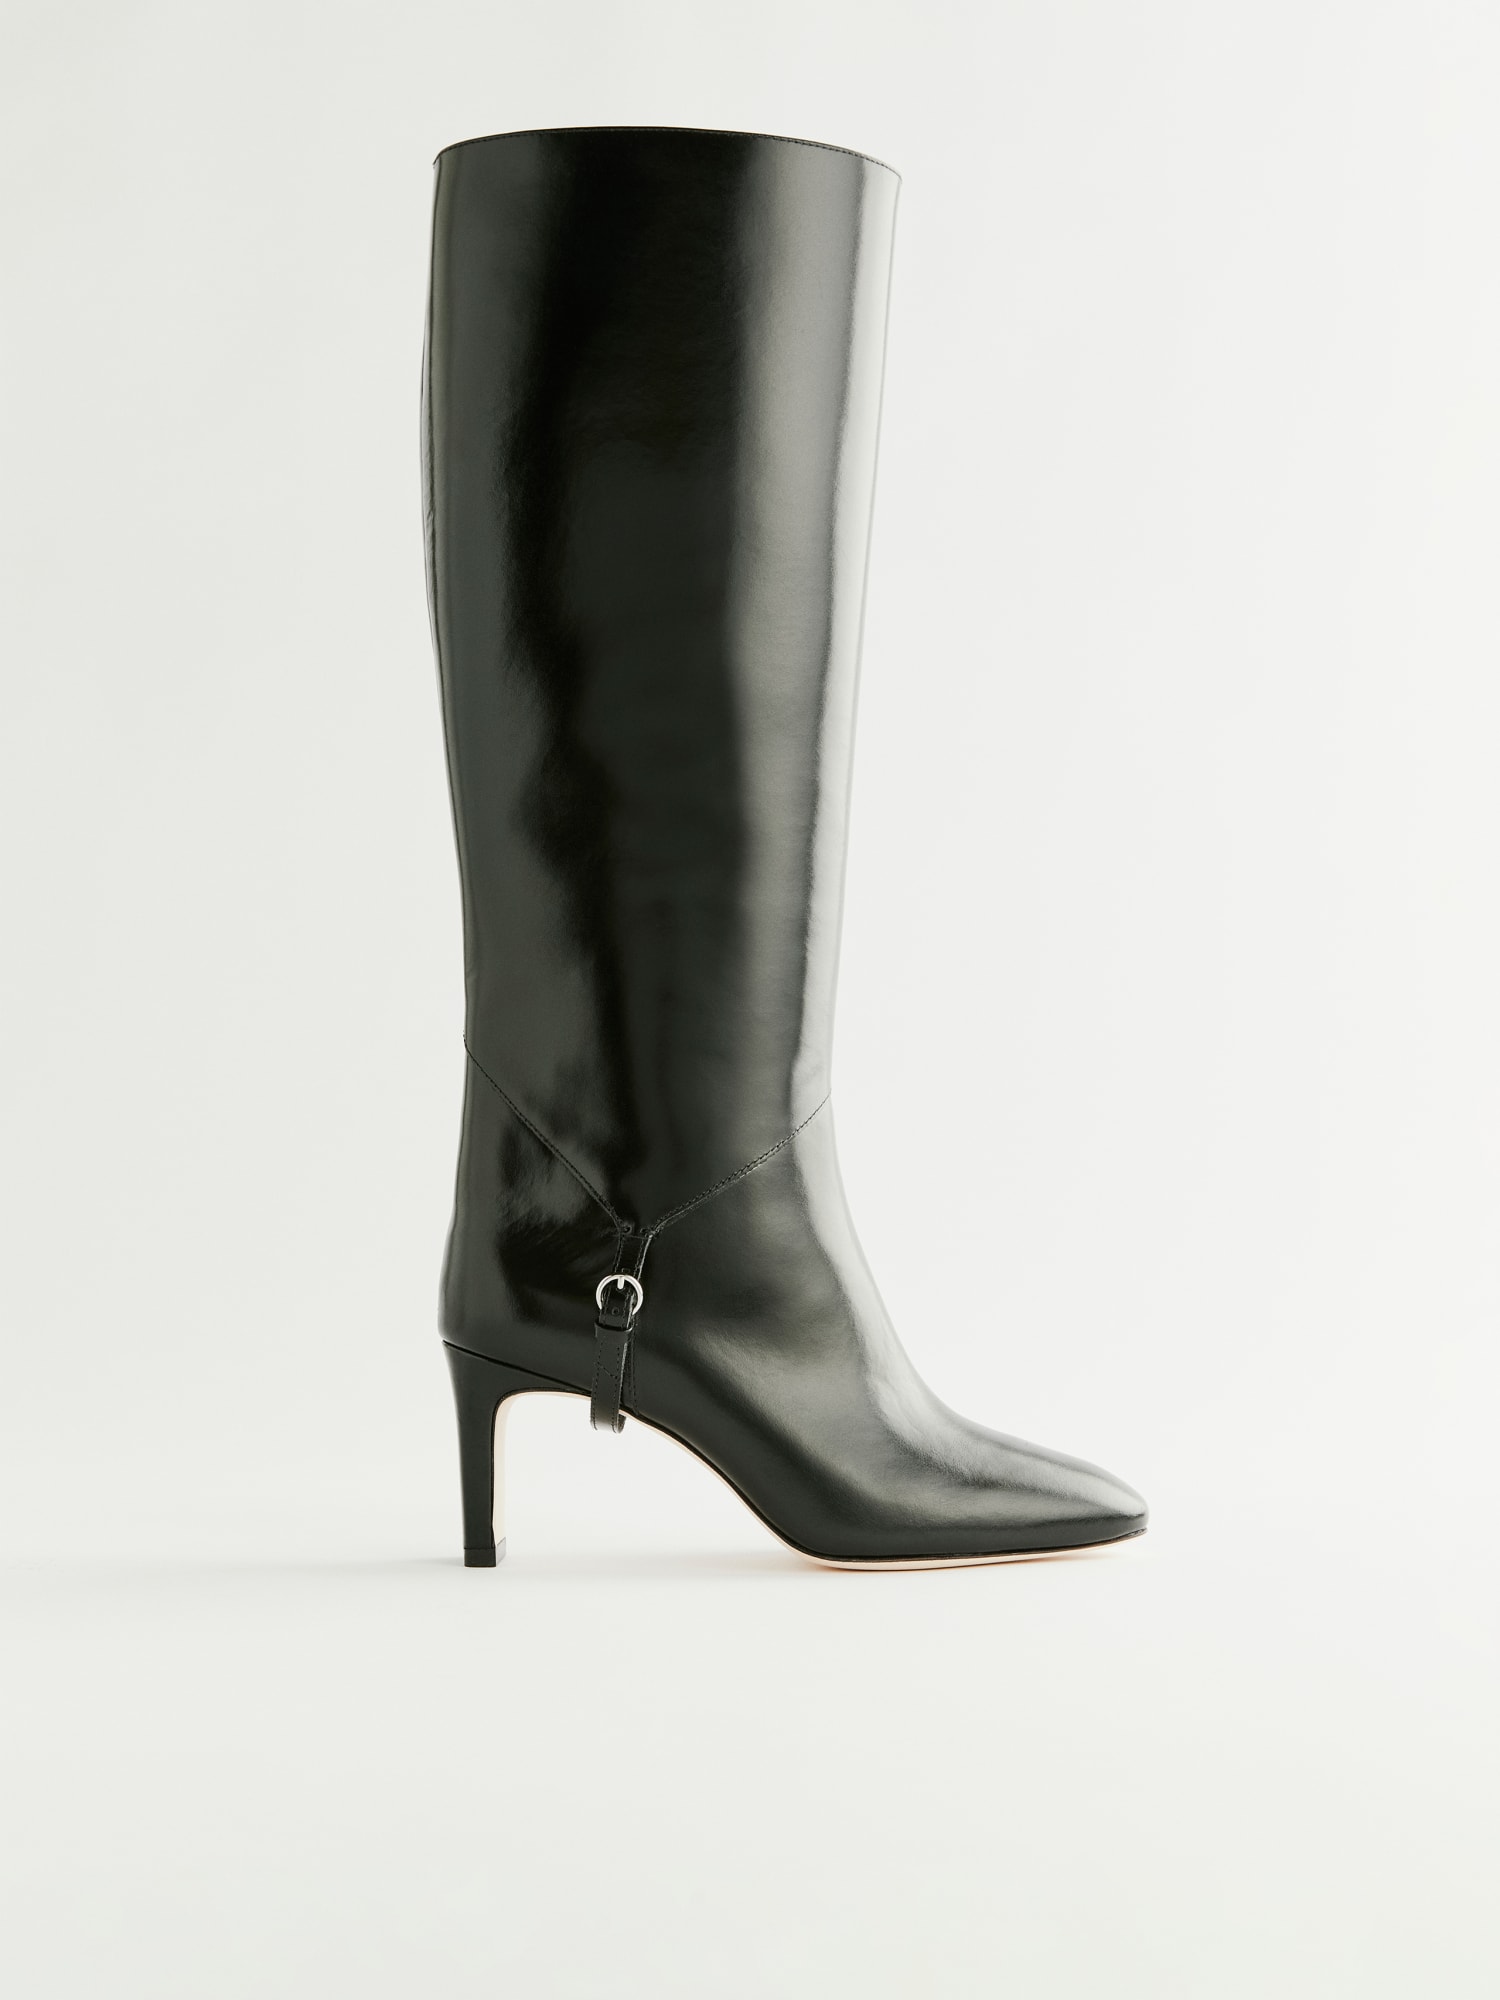 black leather boot with heel